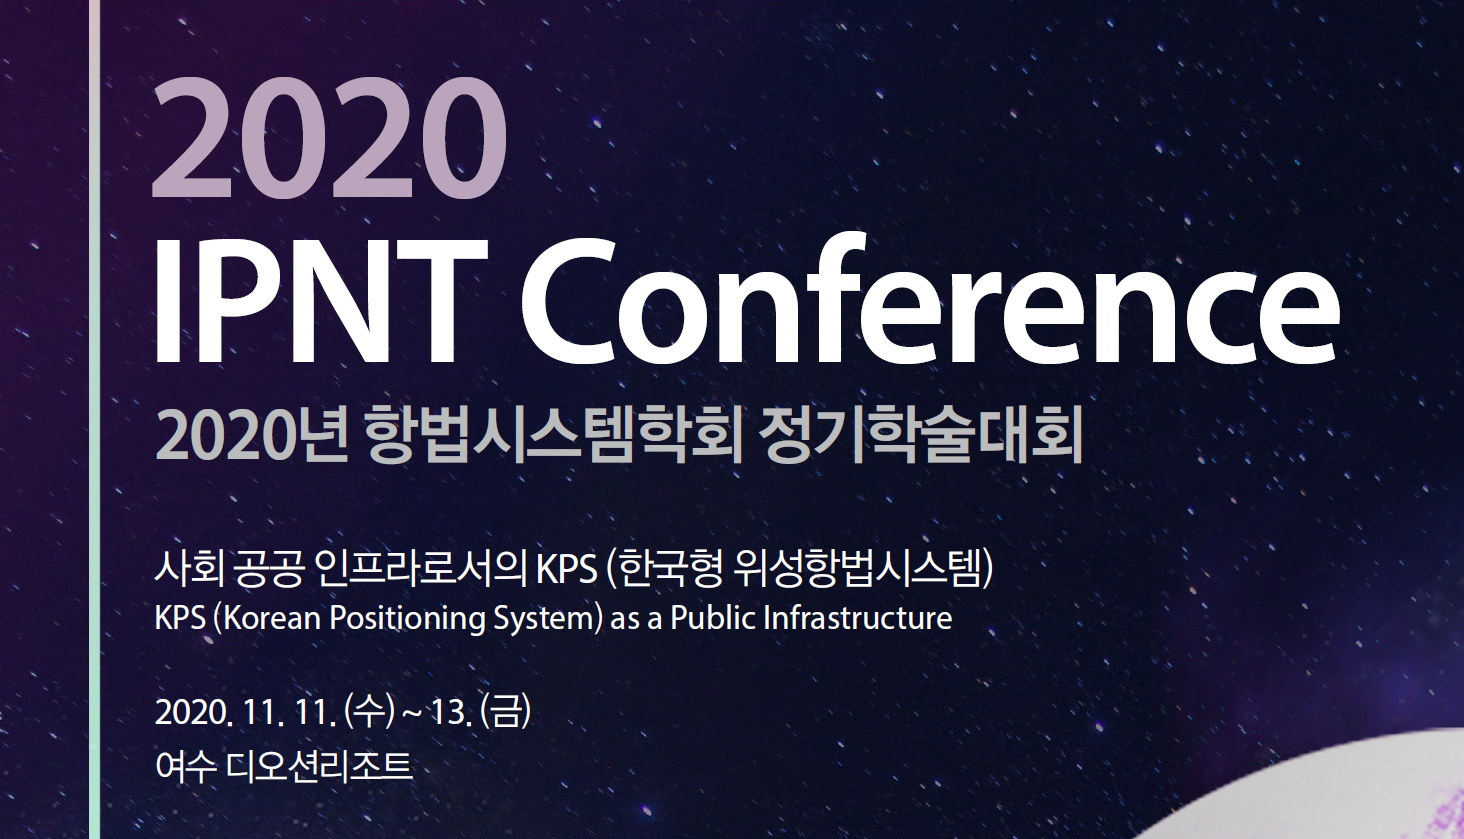 Last-minute opportunity to promote your GNSS products & services at the IPNT conference in South Korea